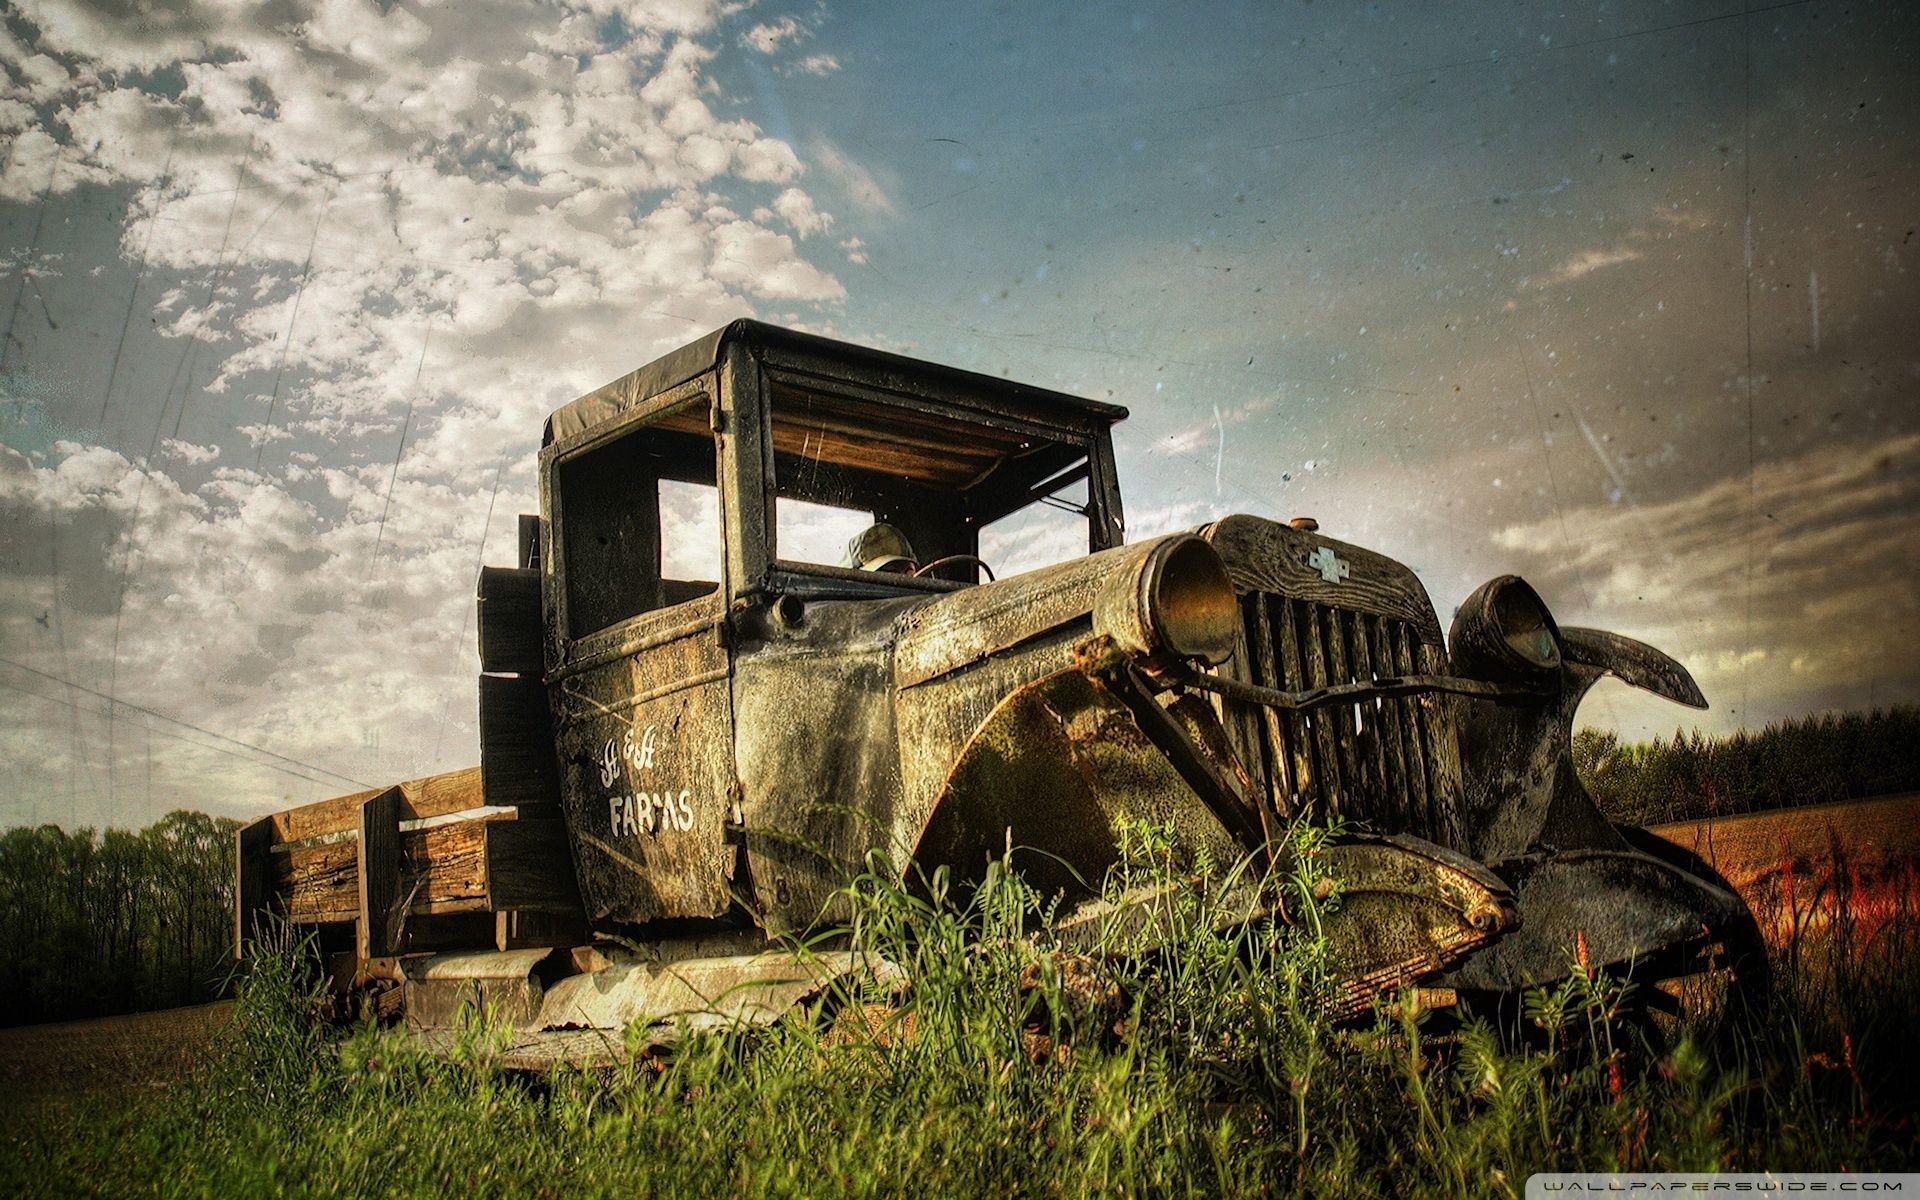 Rusty Old Car Wallpaper Free Rusty Old Car Background